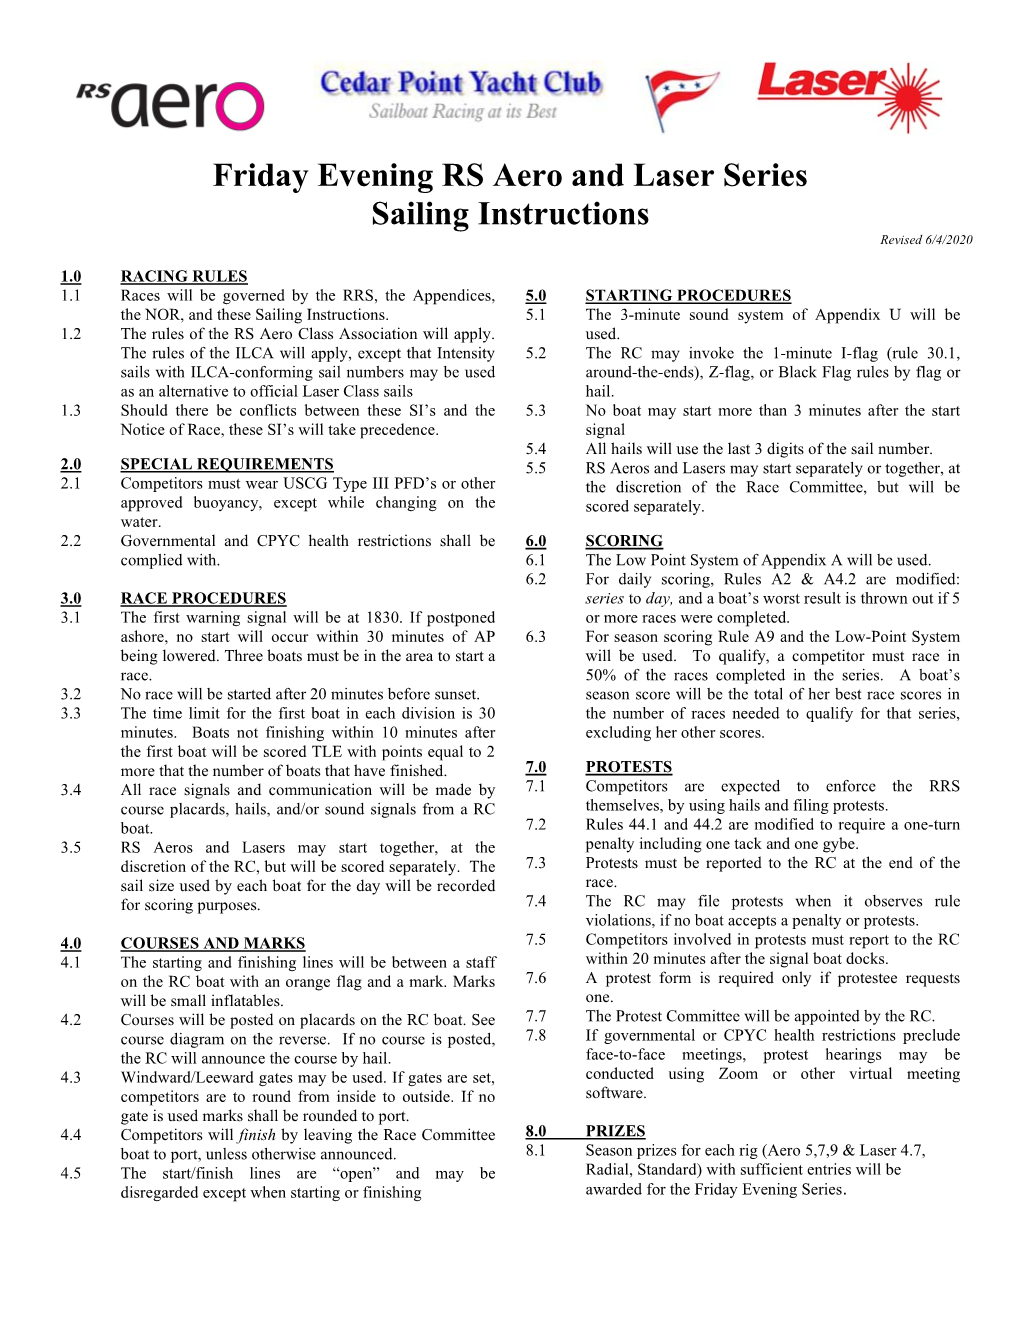 Friday Evening RS Aero and Laser Series Sailing Instructions Revised 6/4/2020